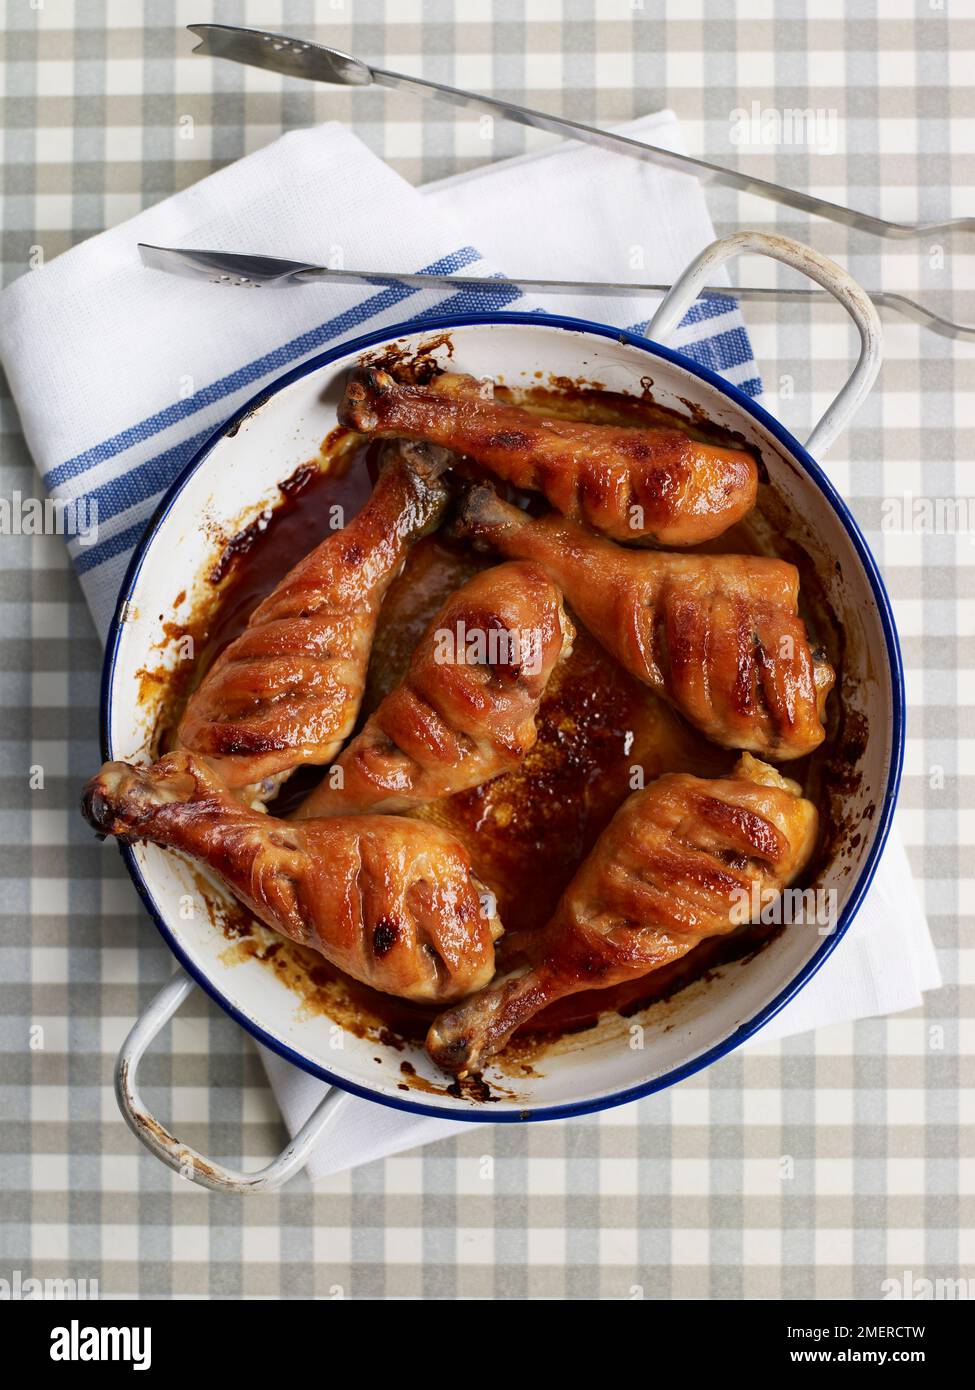 Tray of barbecued chicken drumsticks Stock Photo